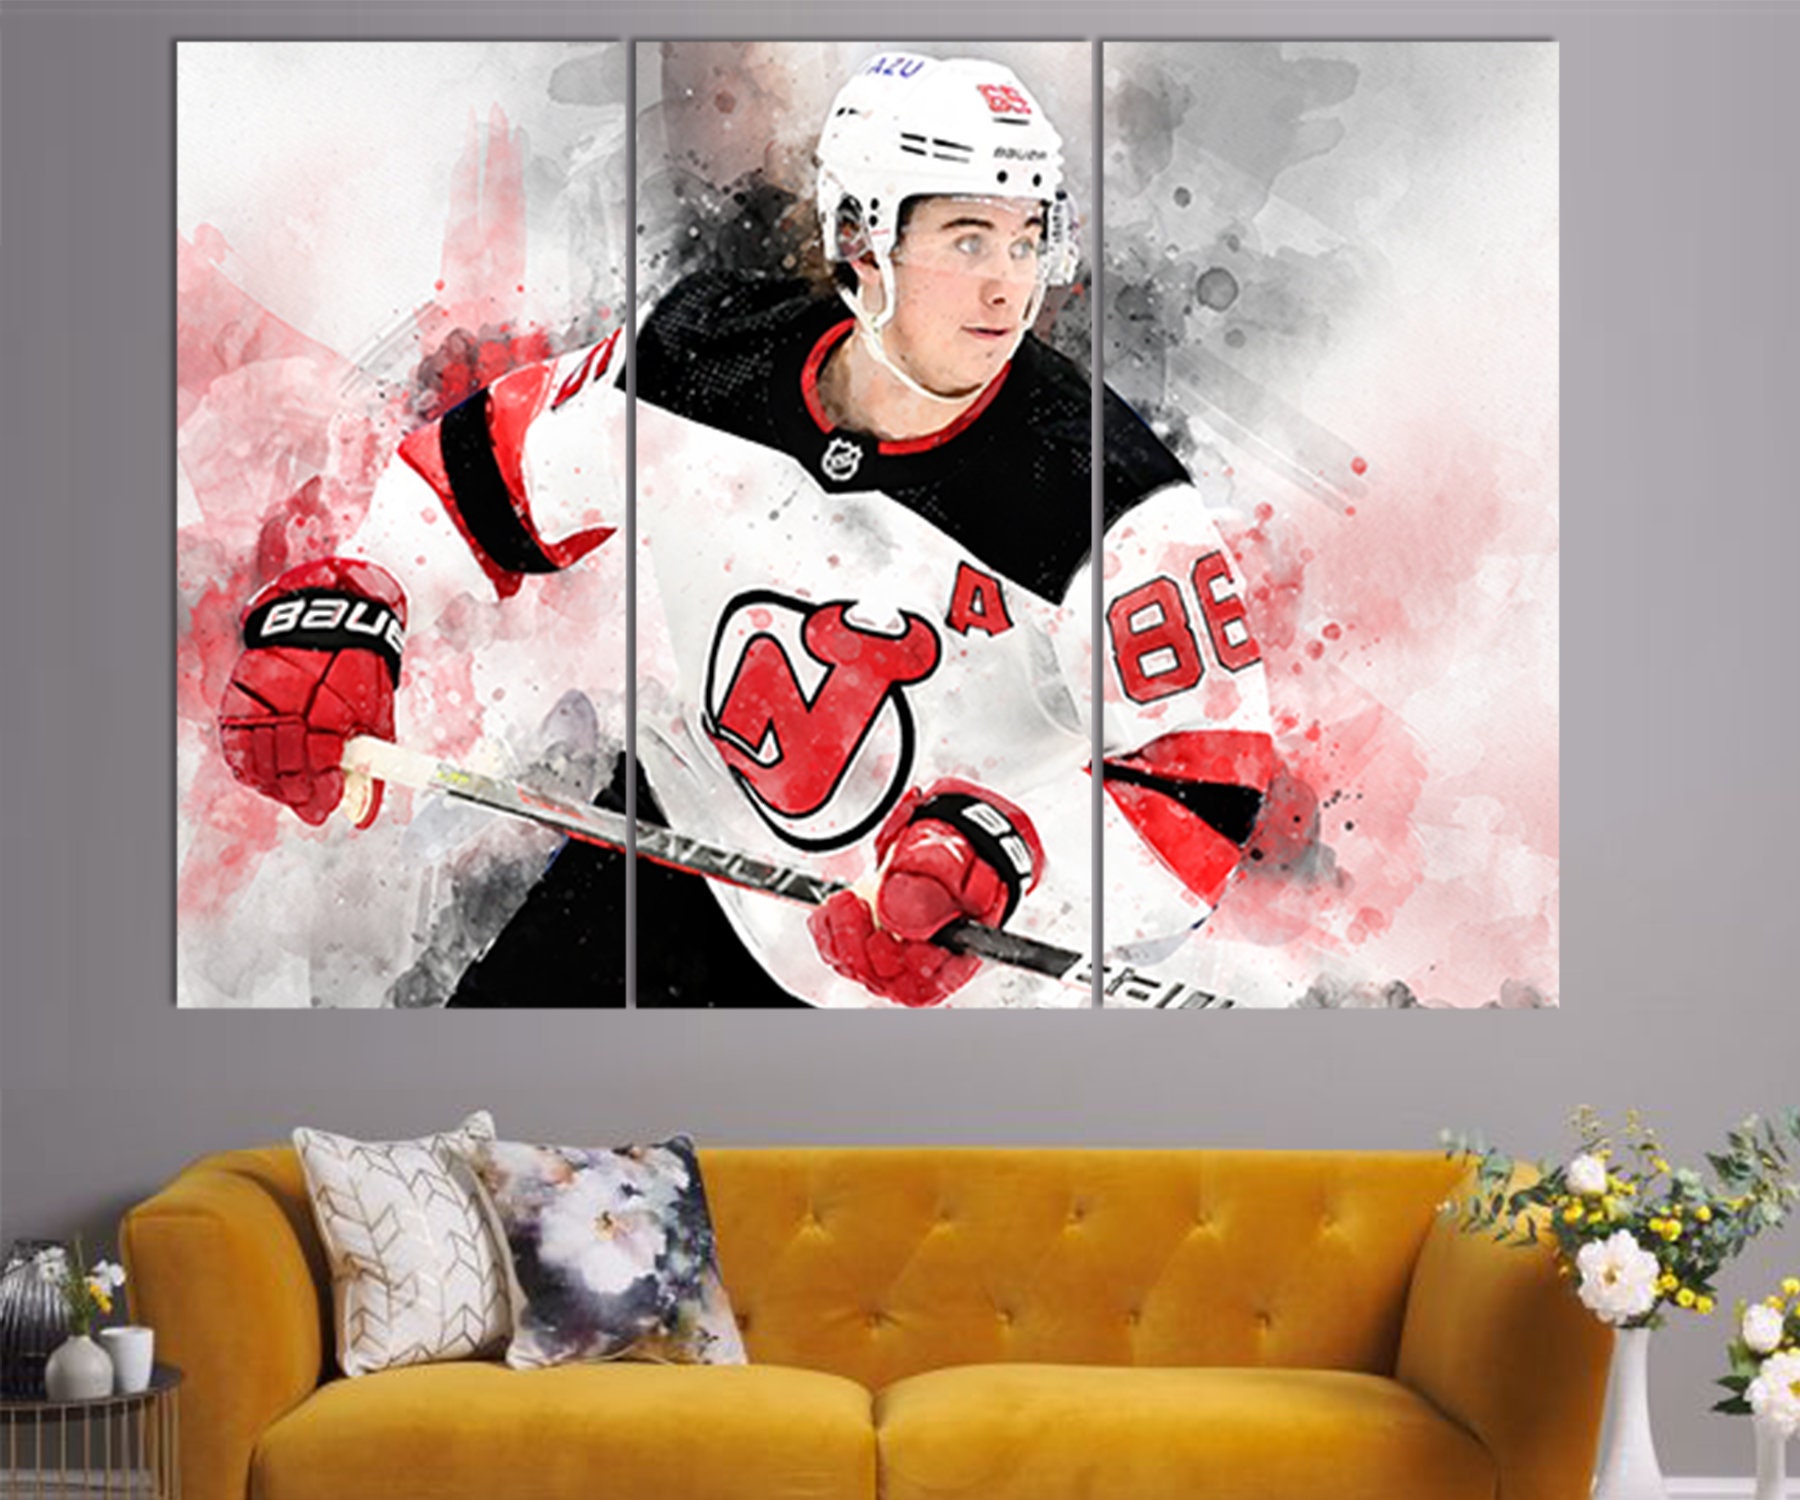 Jack Hughes Ice Hockey American Professional Blanket Gift For Fan